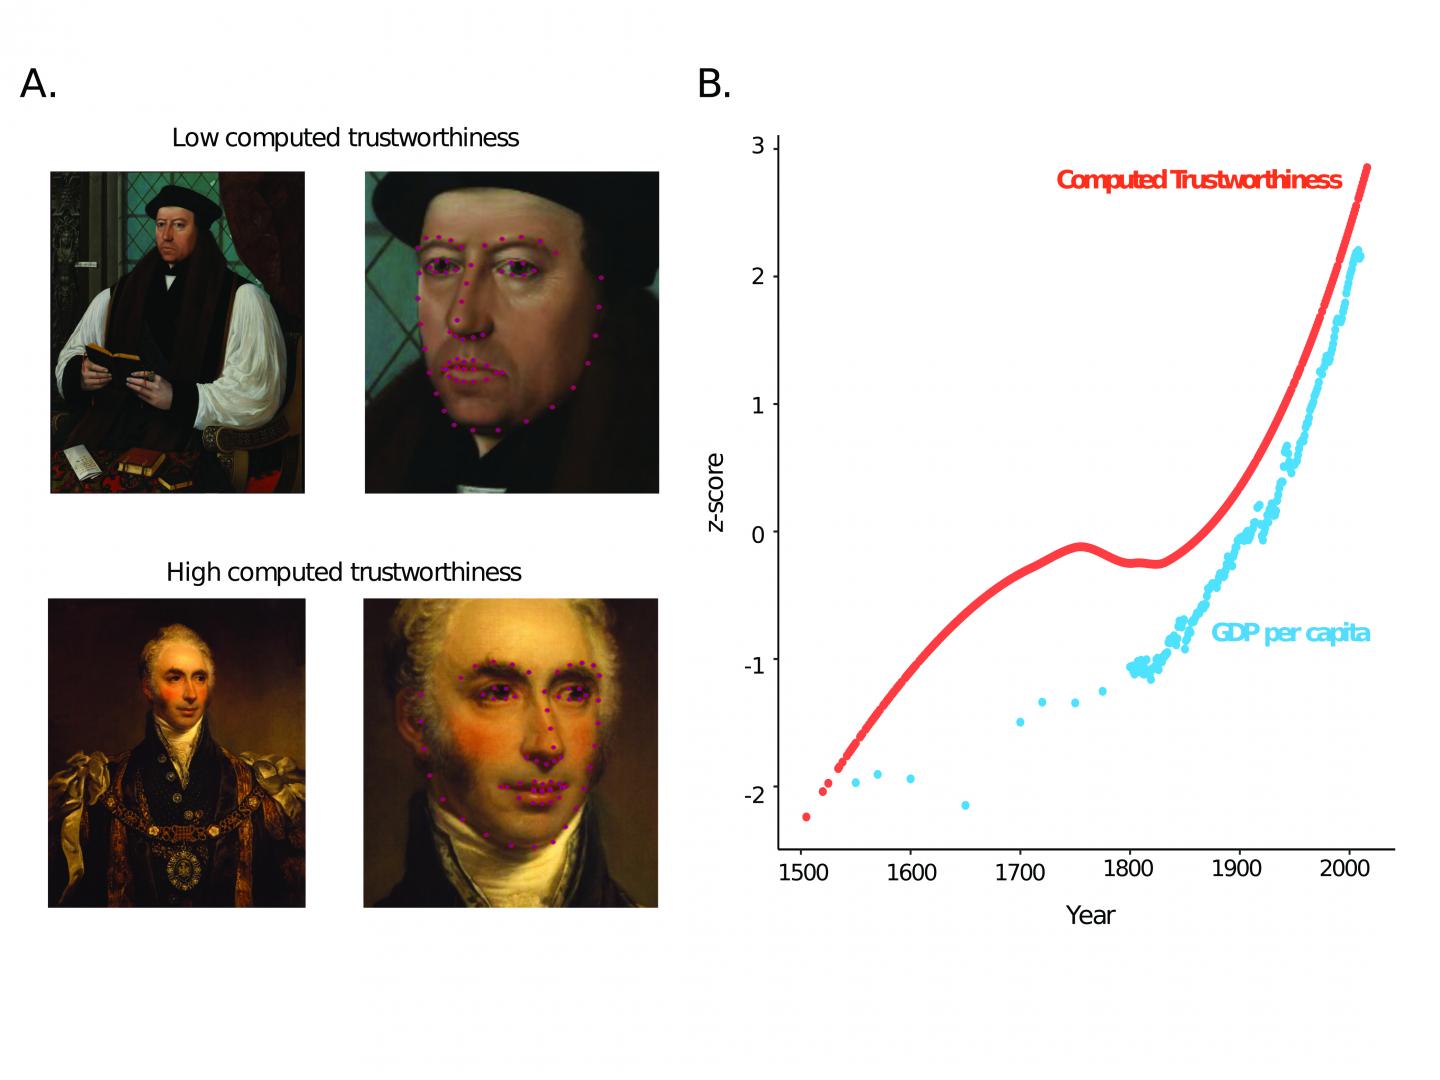 Evolution of Trustworthiness Displays in England across Time